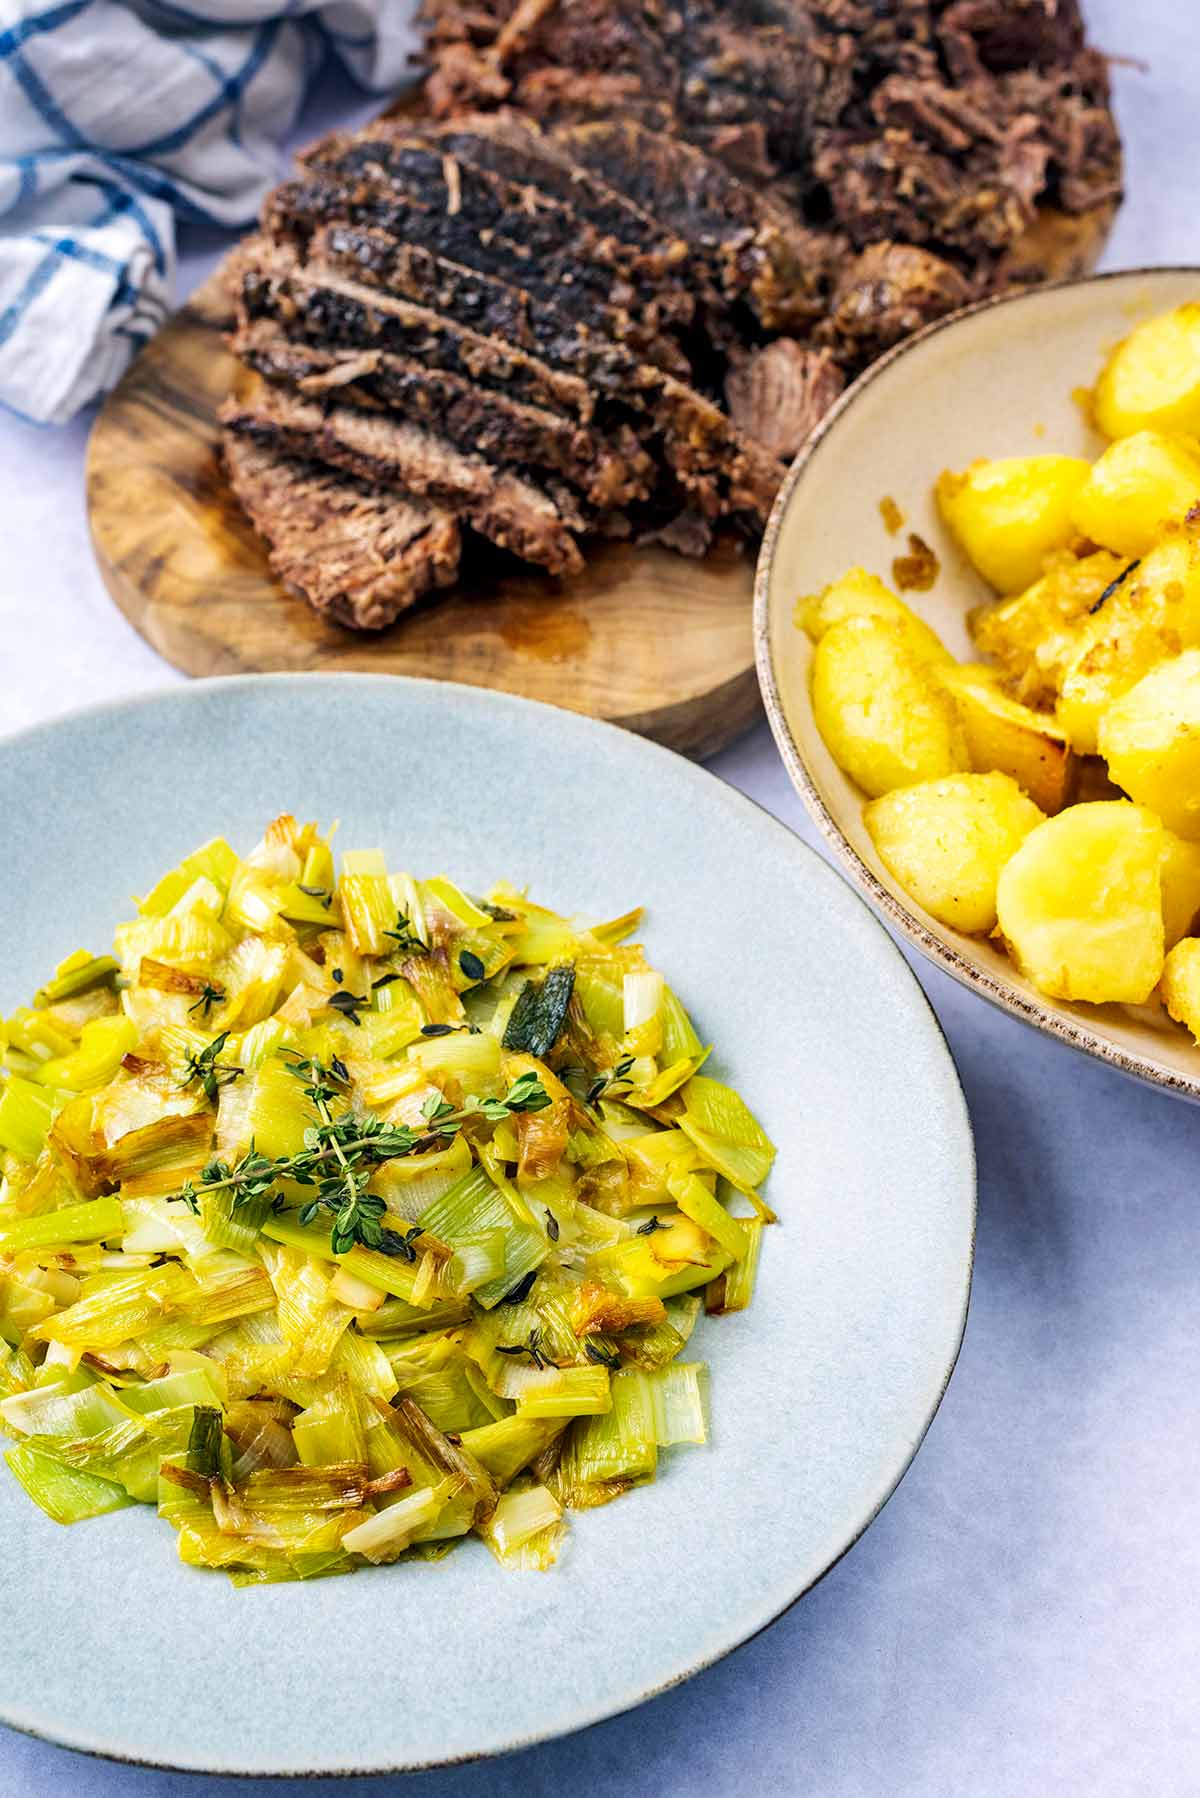 A plate of cooked leeks in front of a bowl of roast potatoes and some sliced beef on a board.